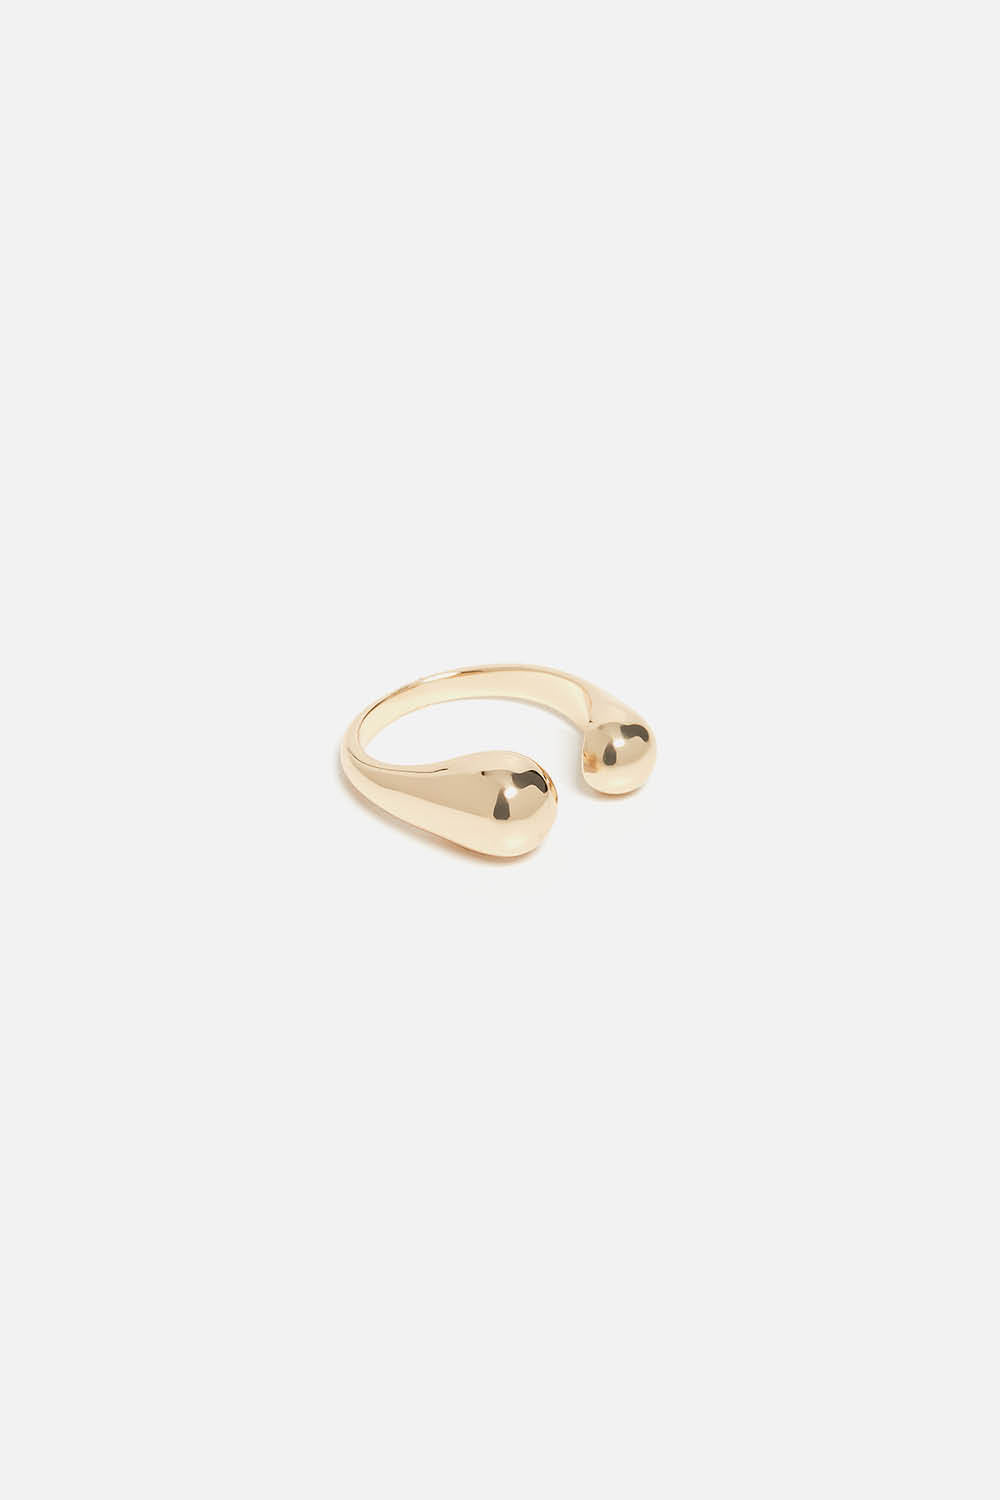 Gina Ring in Gold